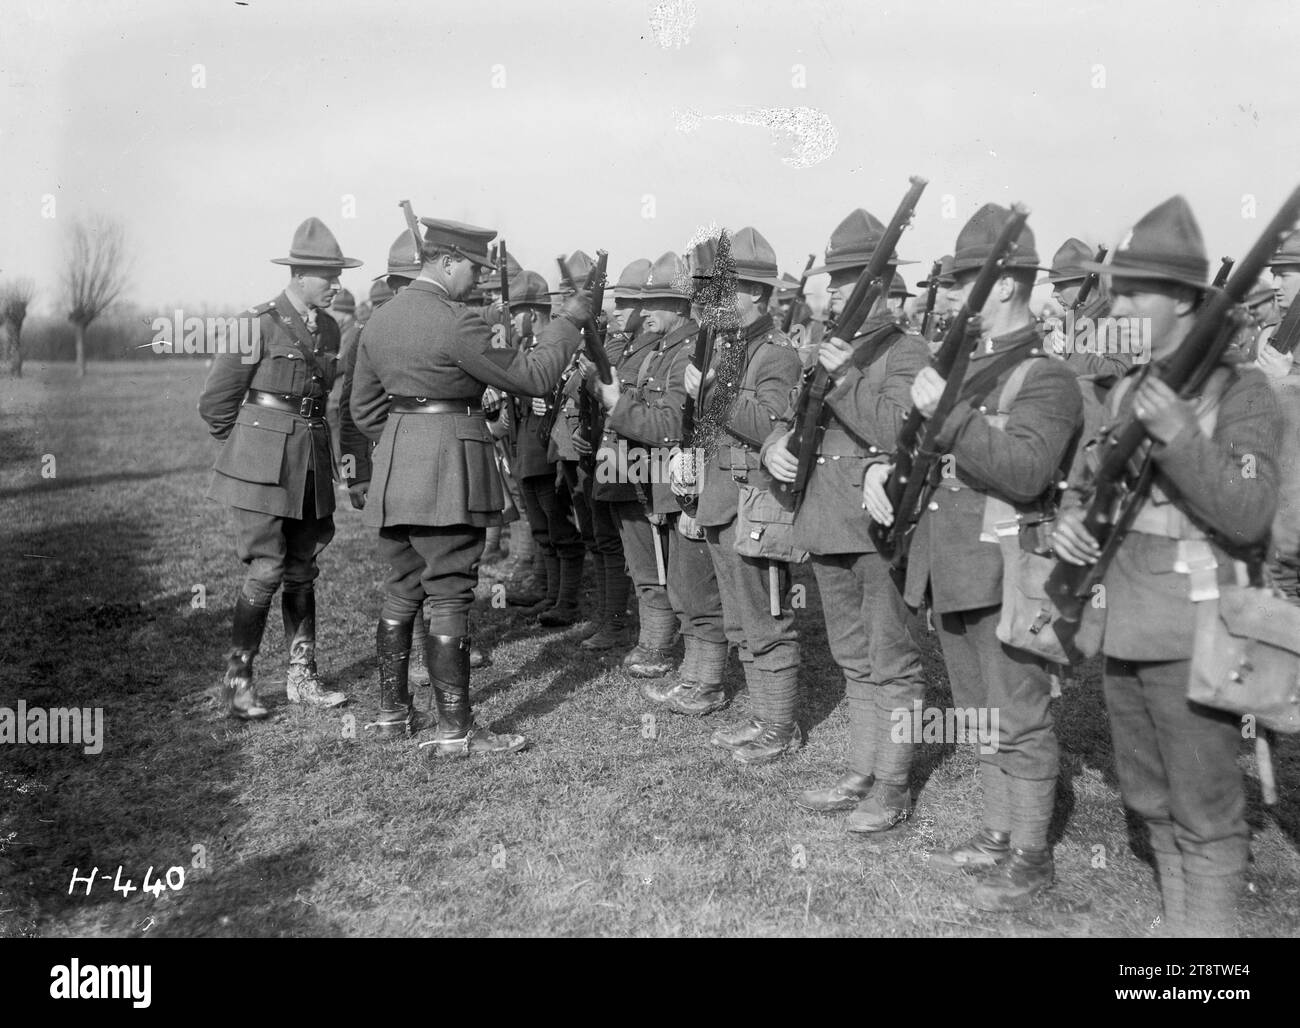 The GOC holds rifle inspection of an Otago battalion during World War I, The General Officer Commanding holds a rifle inspection of an Otago battalion stationed in France during World War I. He is standing in front of a row of soldiers and is examining the barrel of a rifle. Photograph taken 3 March 1918 Stock Photo